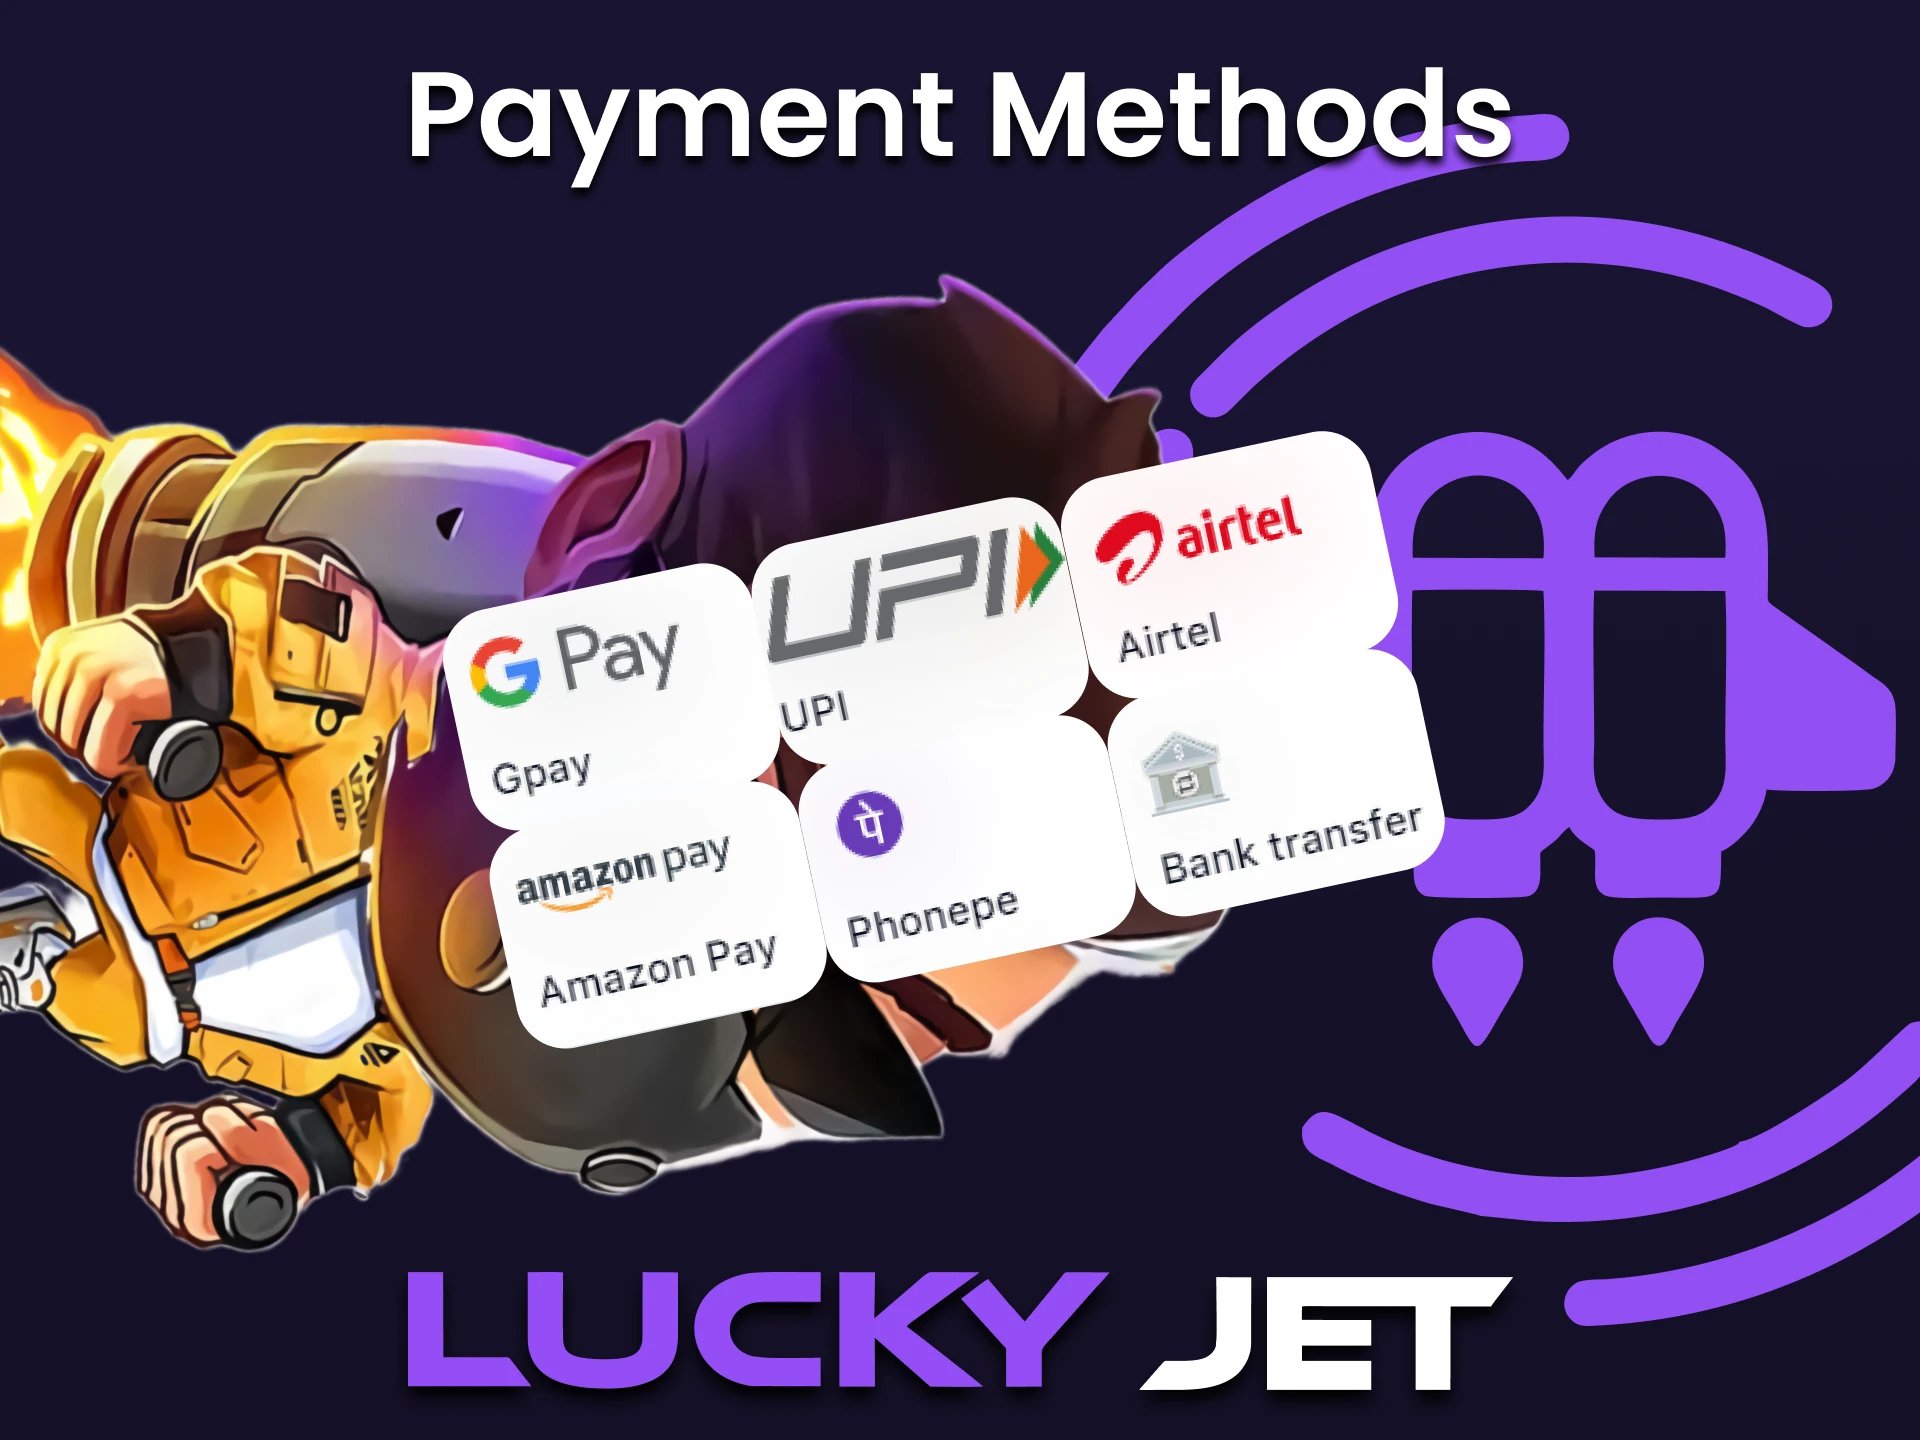 Use the convenient way to convert funds in the Lucky Jet game.